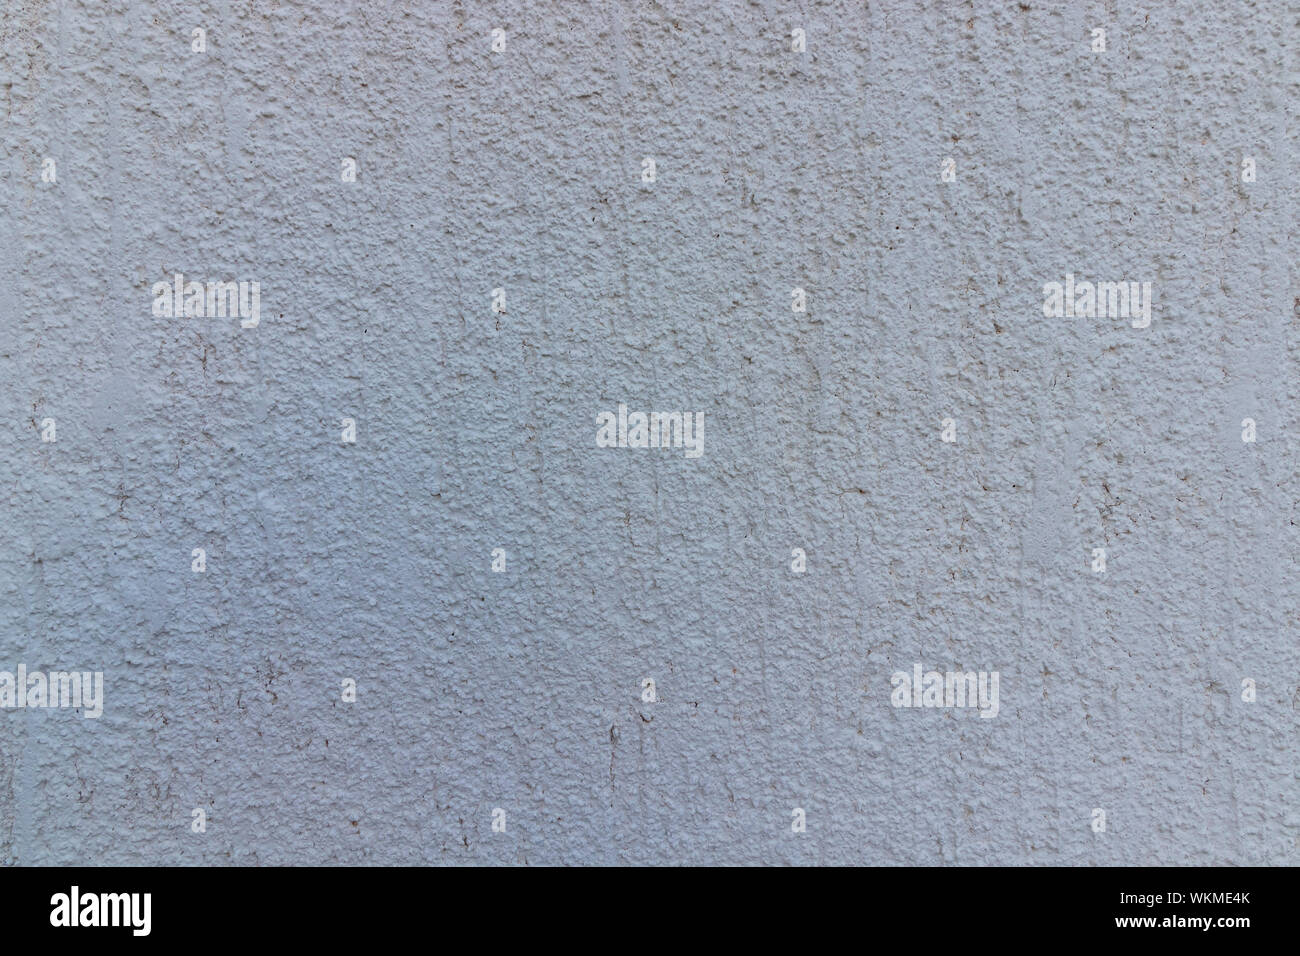 the rugged white surface of the home facade Stock Photo